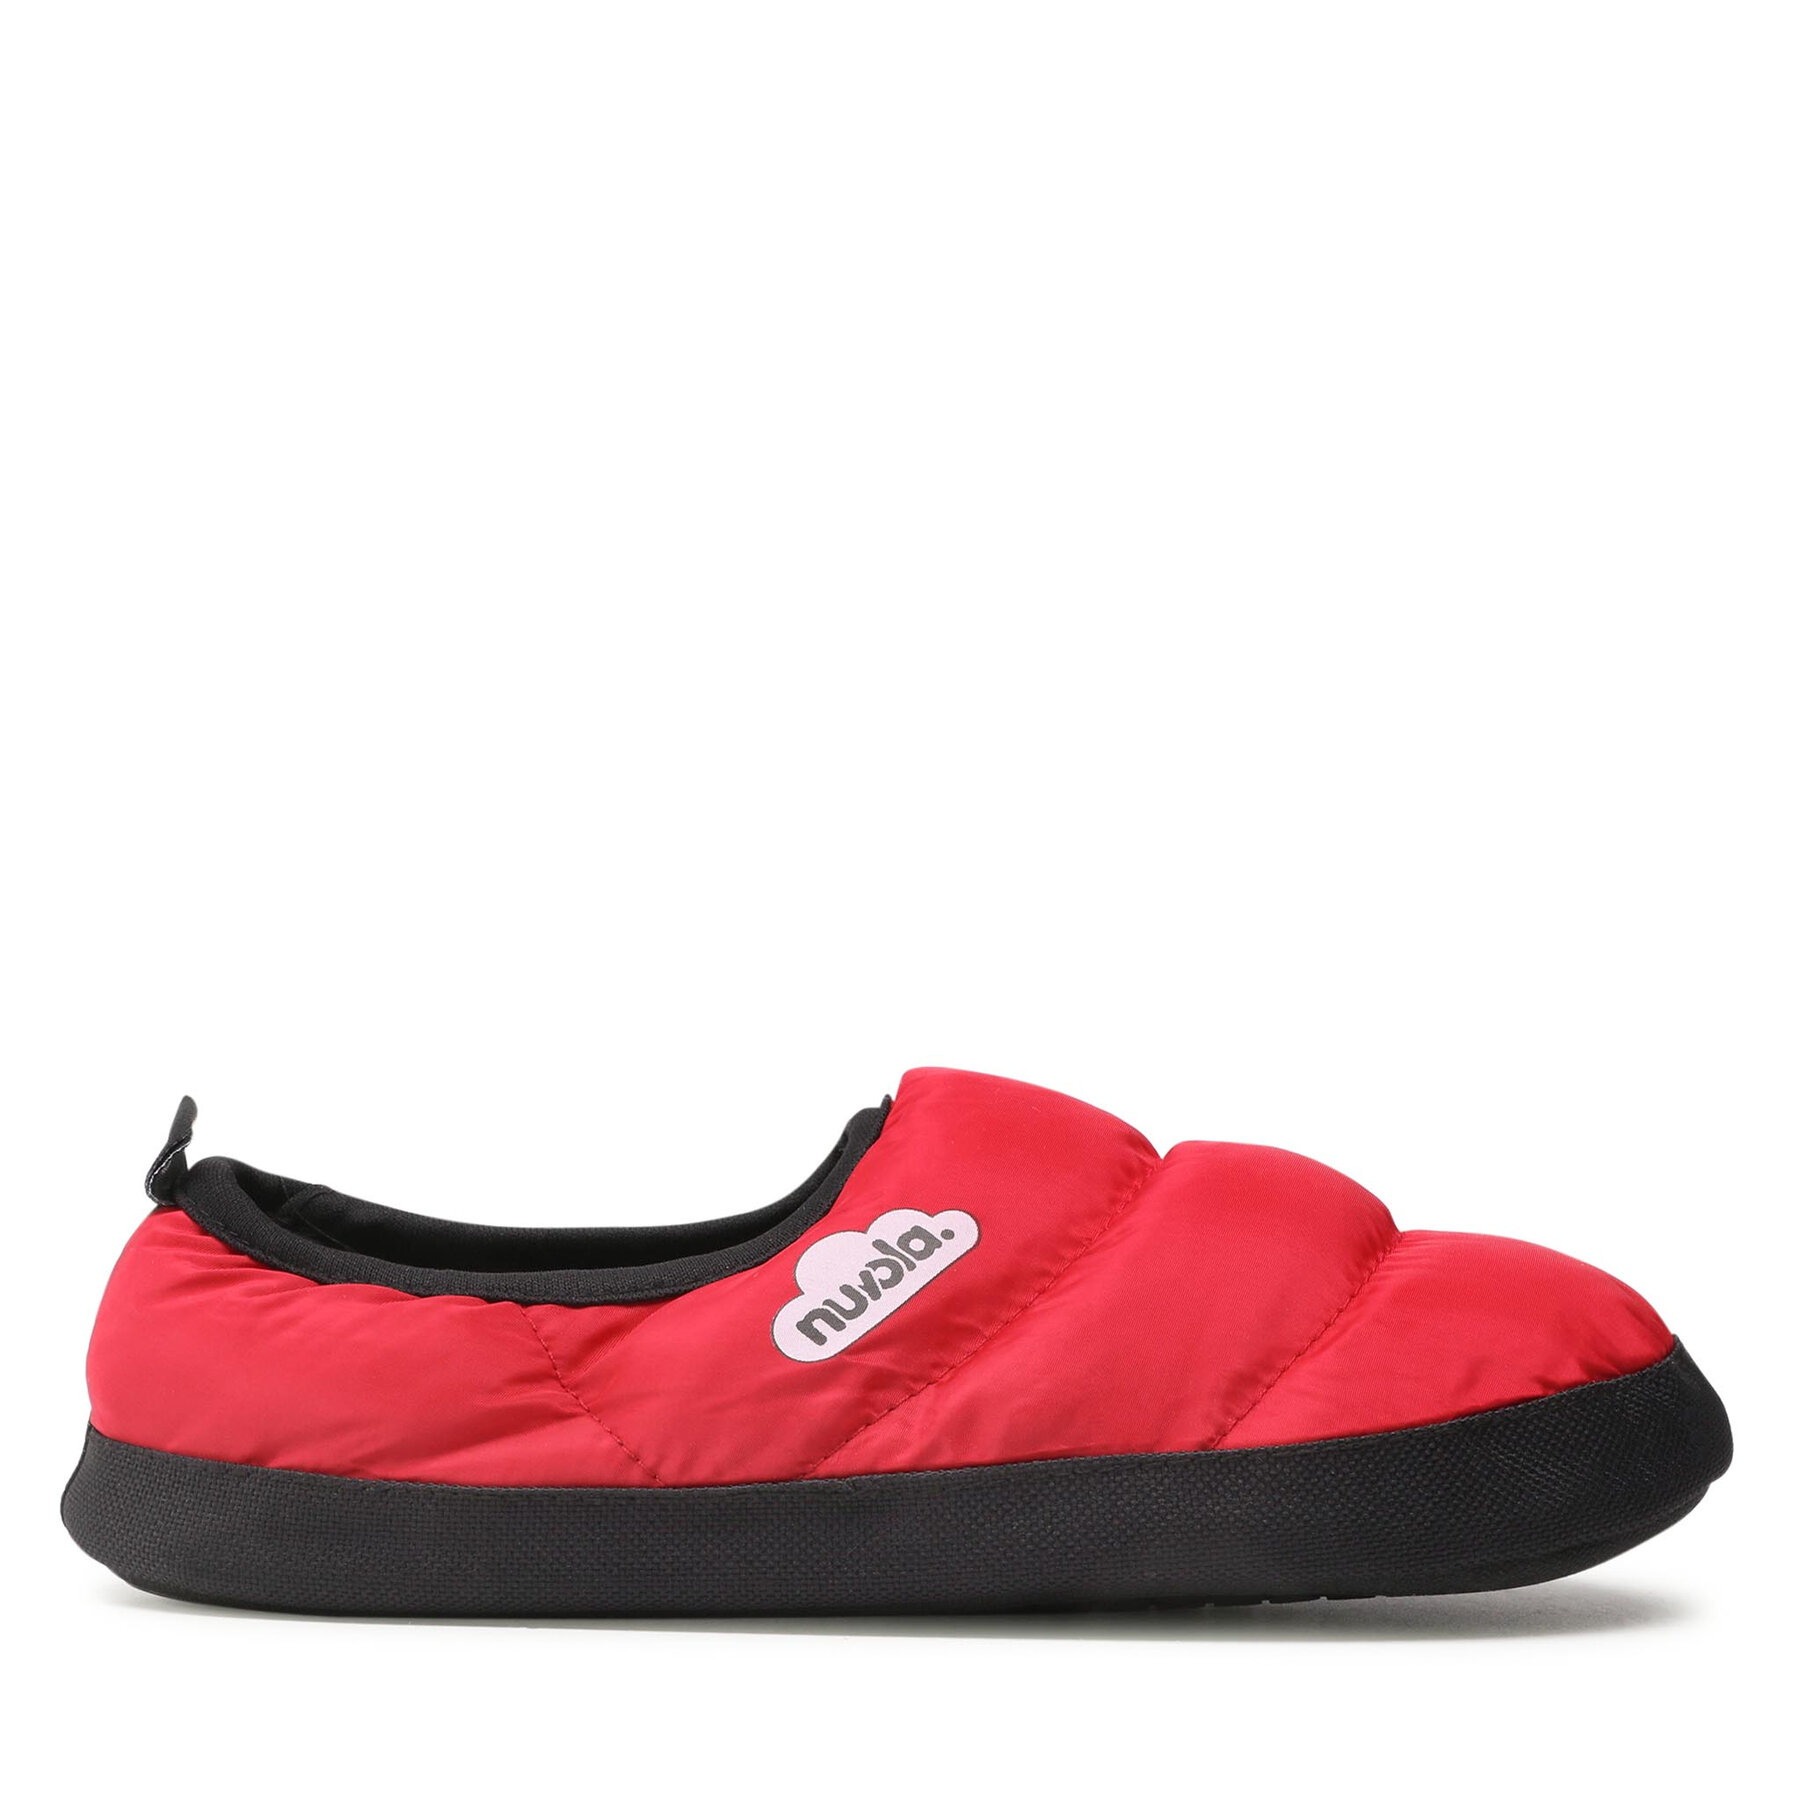 nuvola UNCLAG Slippers red